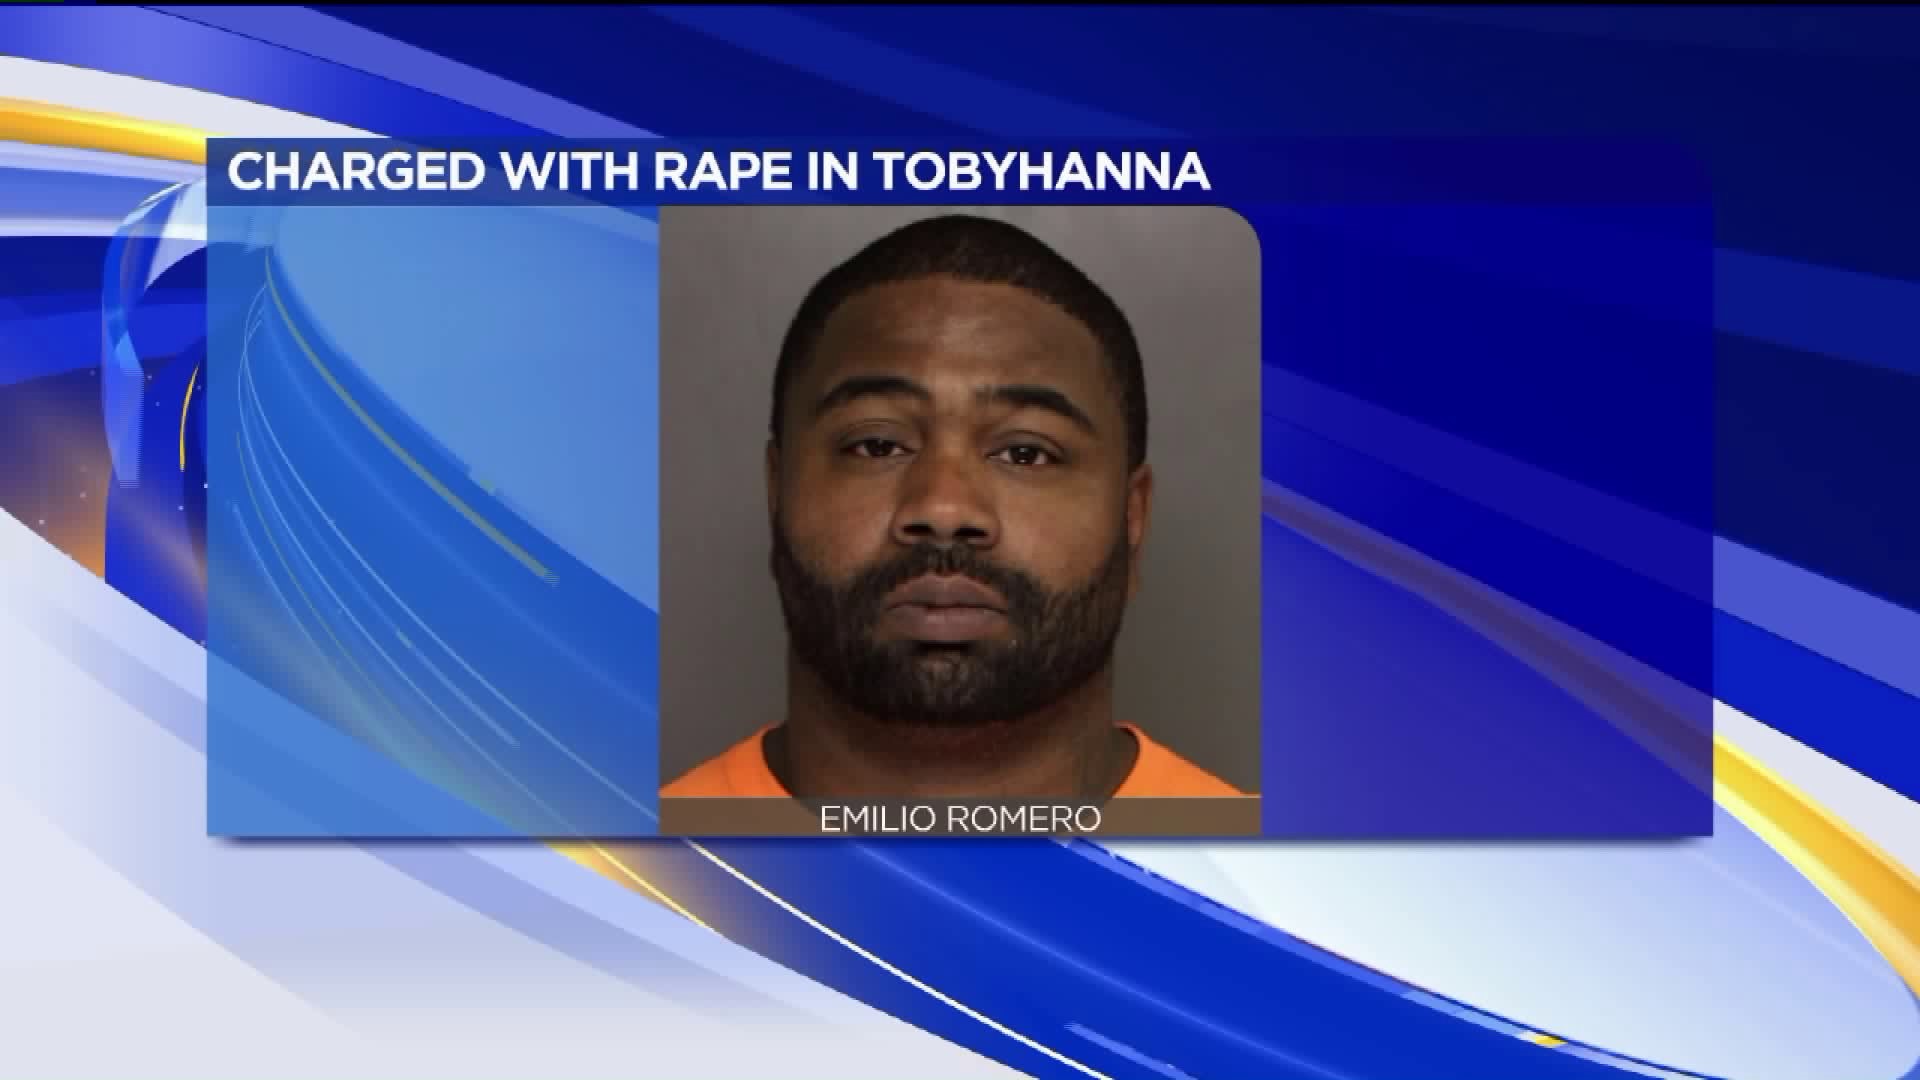 Man from the Poconos Charged with Rape